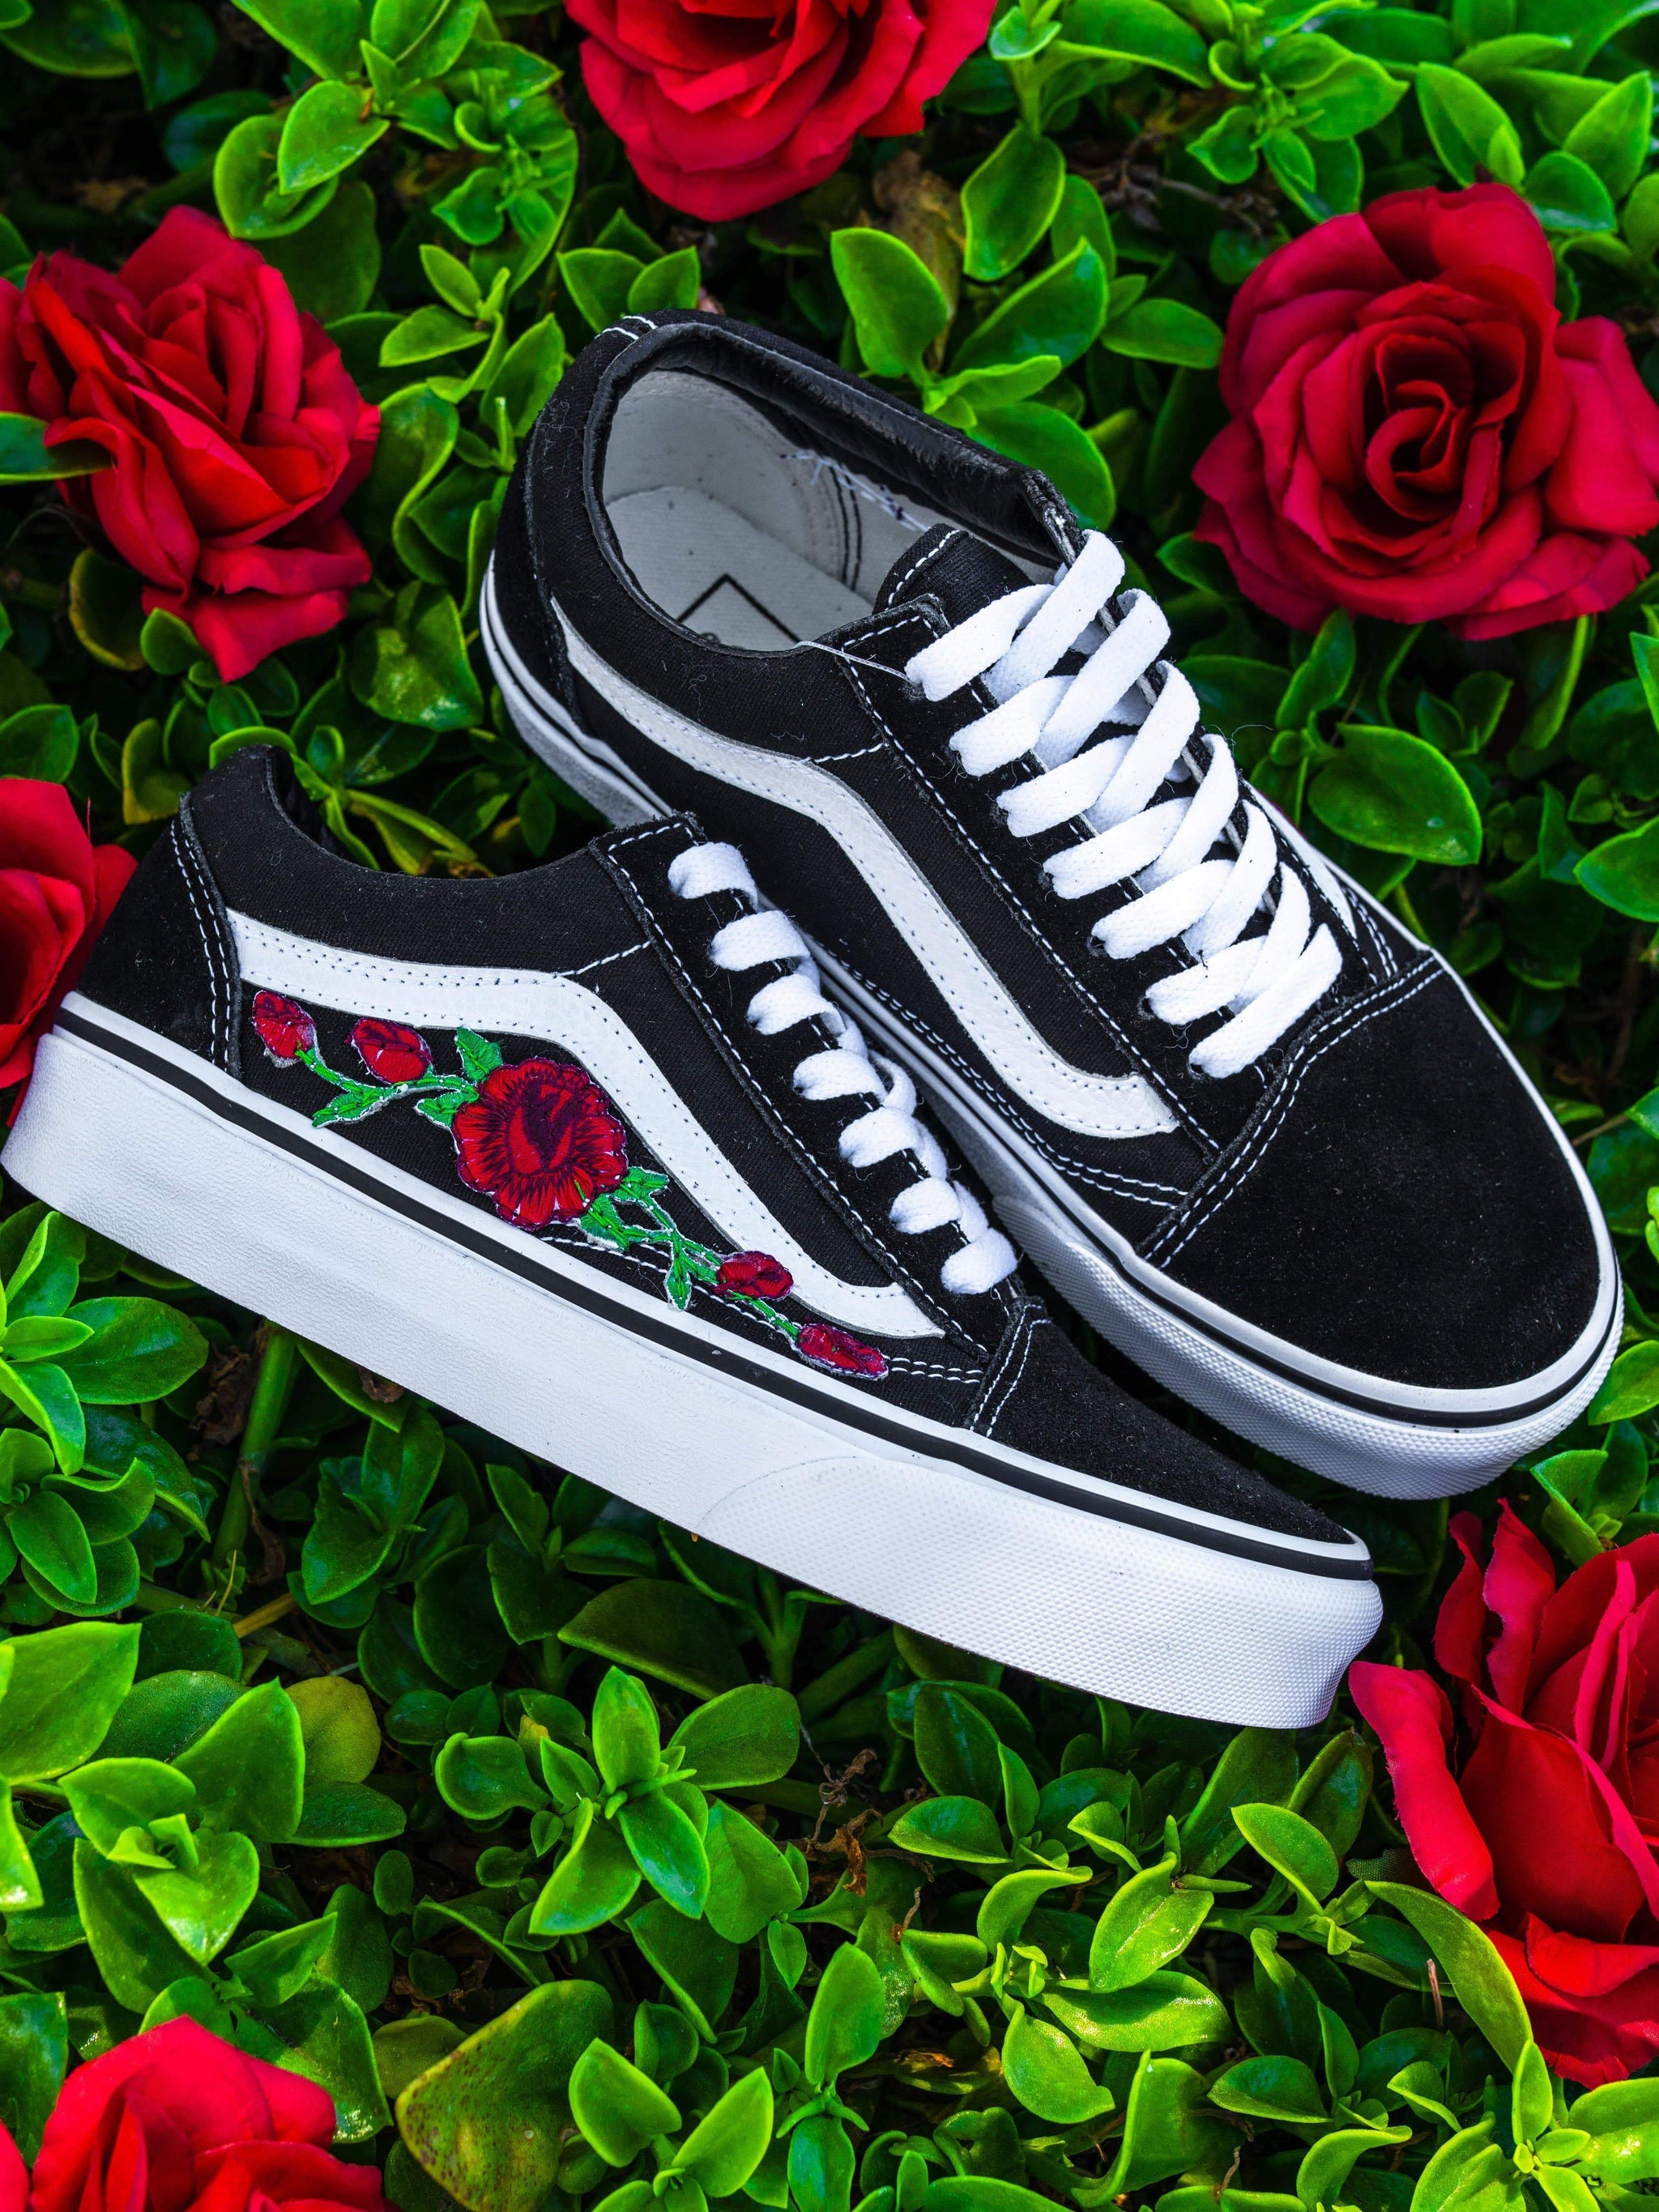 converse red rose